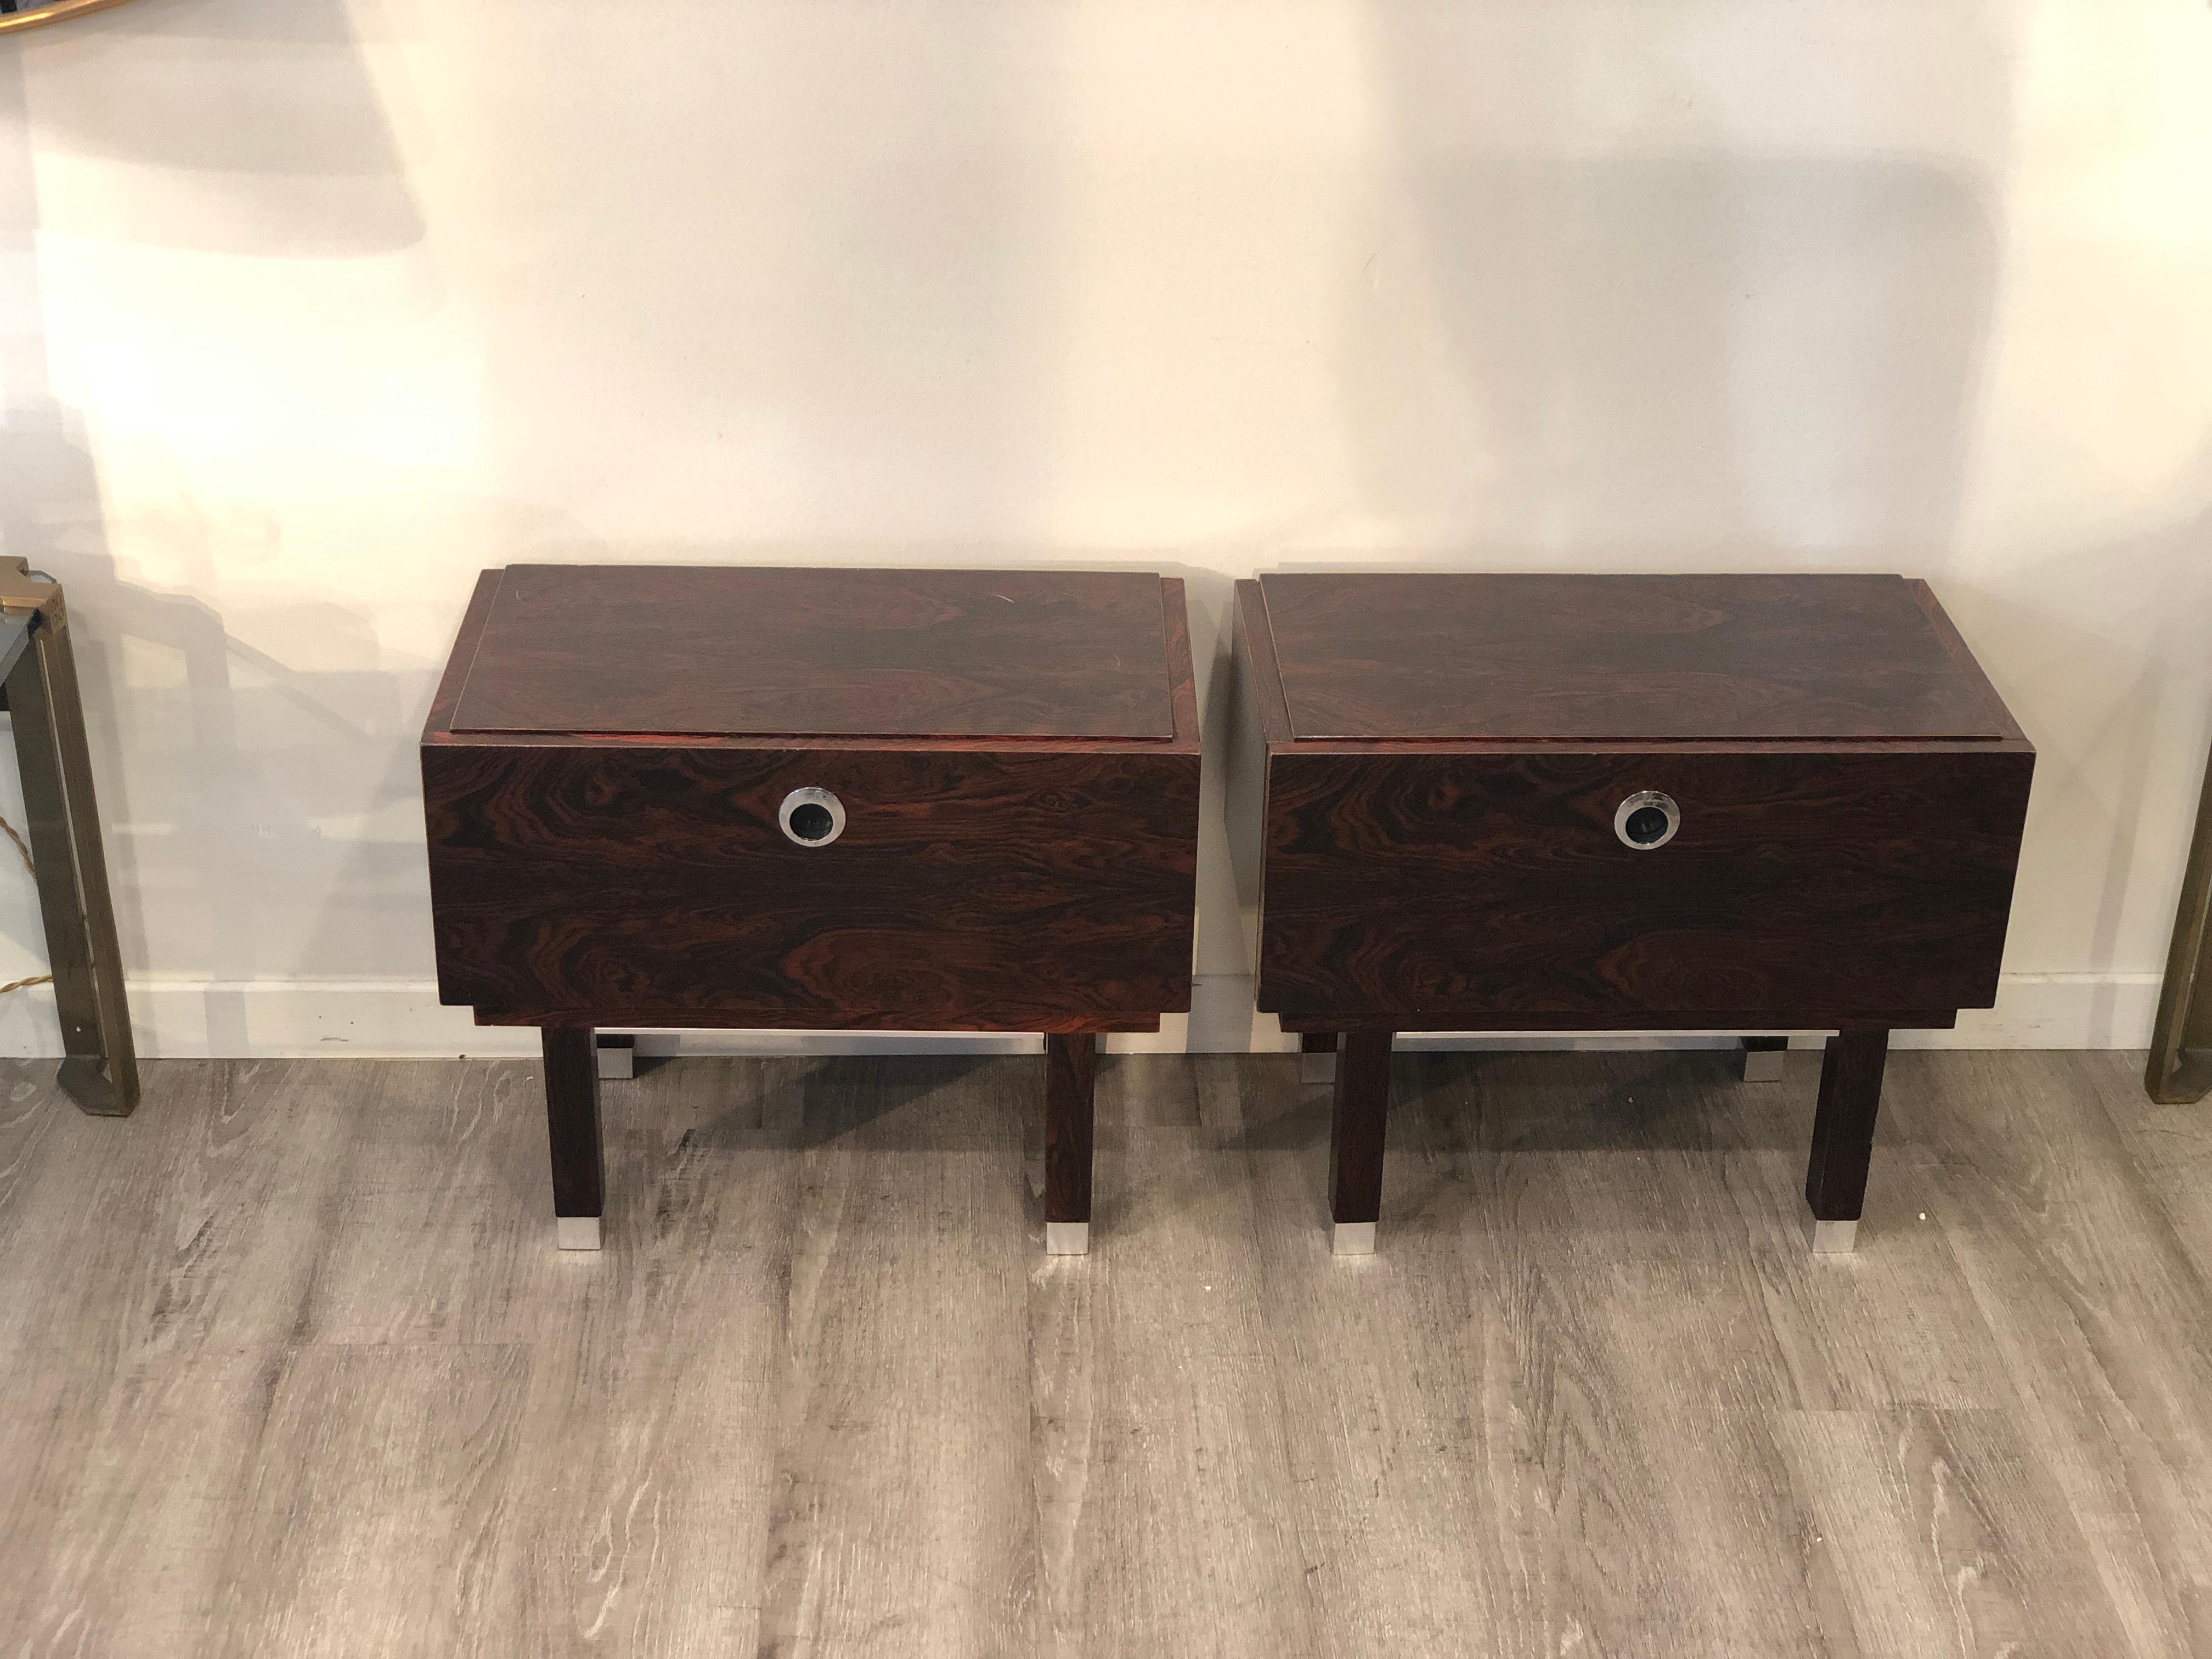 Flap door 1970s two nightstands from France, made of veneered rosewood they feature metallic details like the handles legs endings.
Good conditions, the bed side tables show wears coherent with age and use. Restored in conservative way.
Size: 44.5